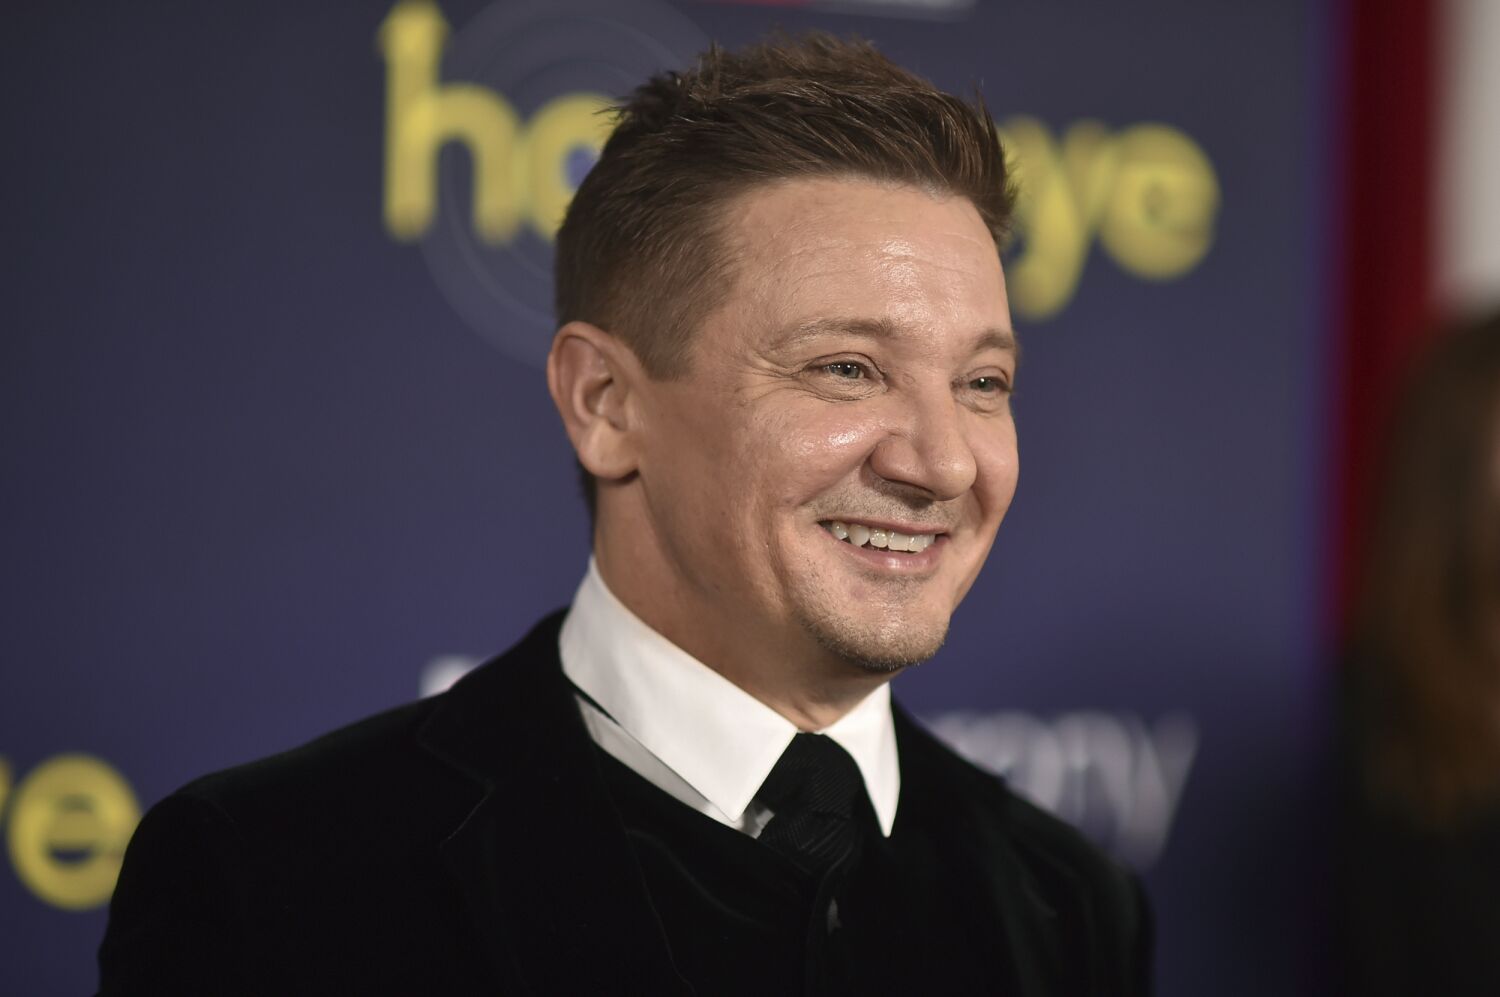 Jeremy Renner was 'helping someone stranded in the snow' before snowplow accident